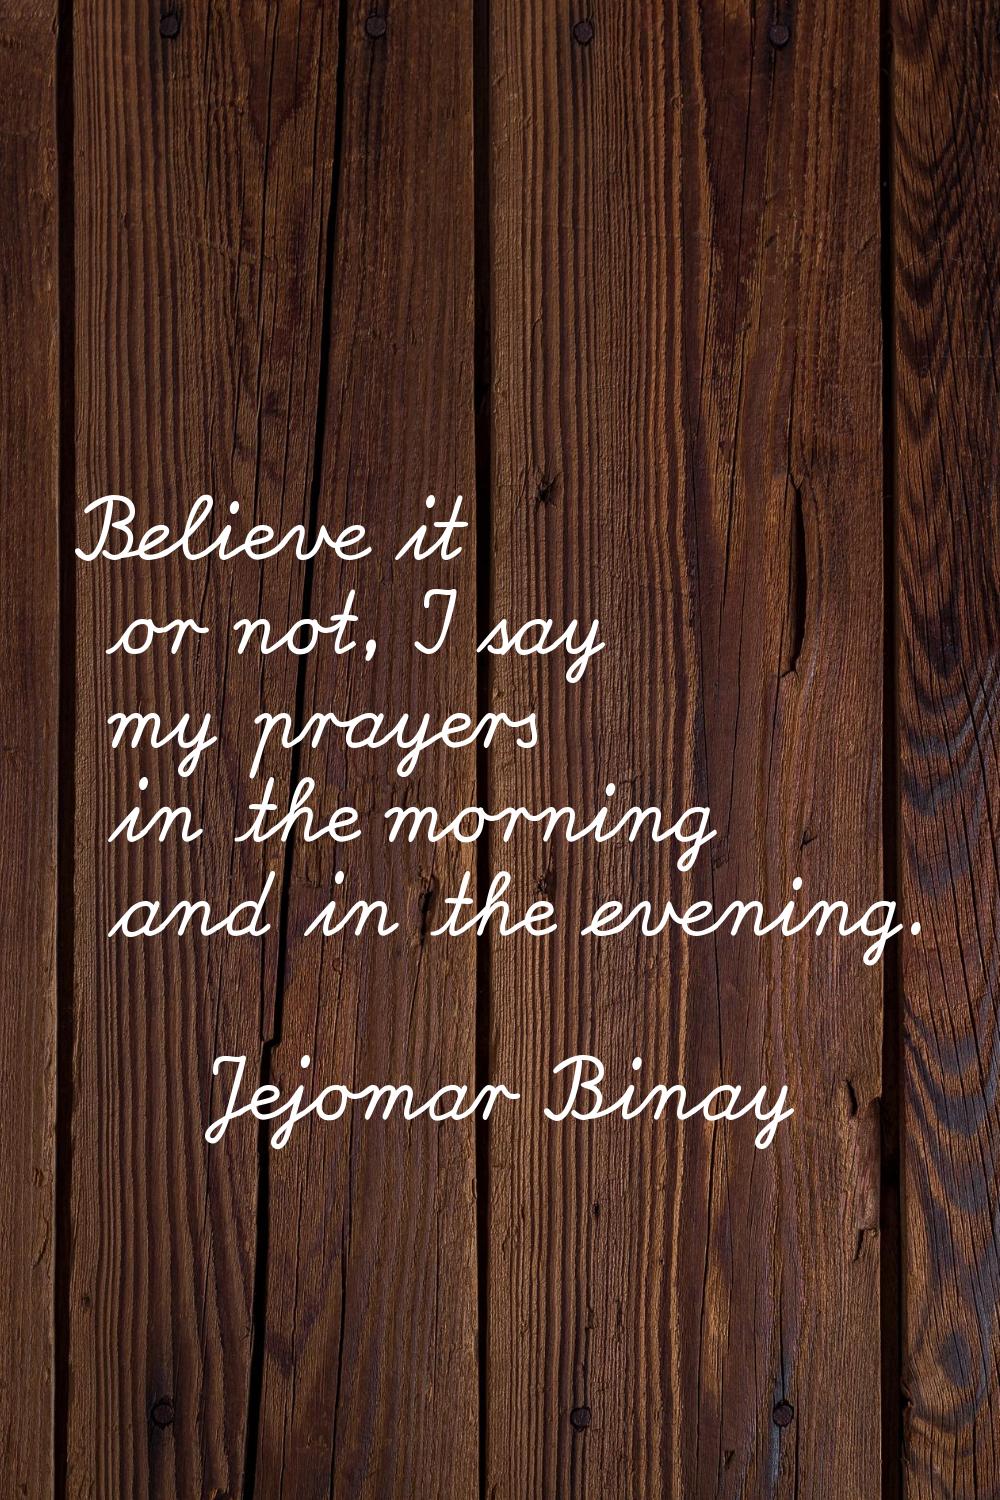 Believe it or not, I say my prayers in the morning and in the evening.